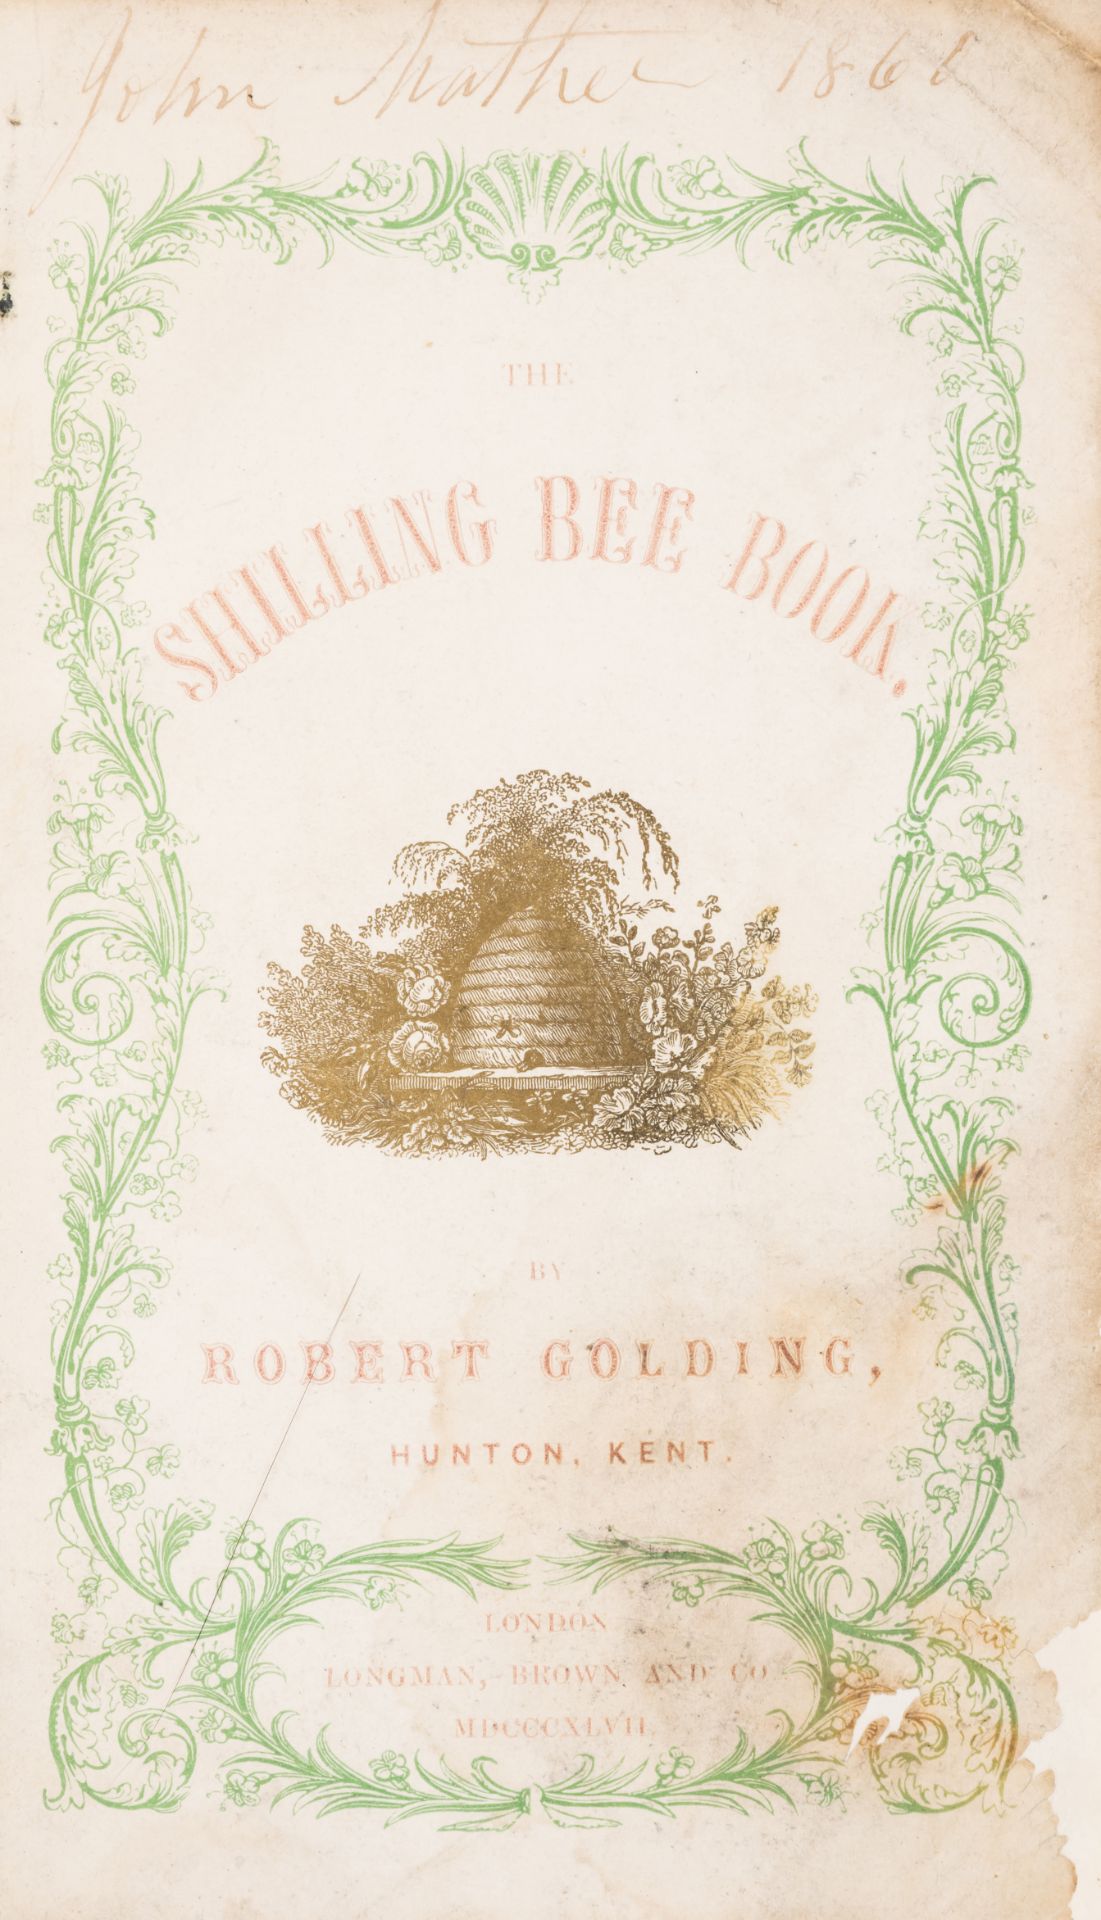 Bees.- Golding (Robert) The Shilling Bee Book, containing the leading facts in the natural histor...